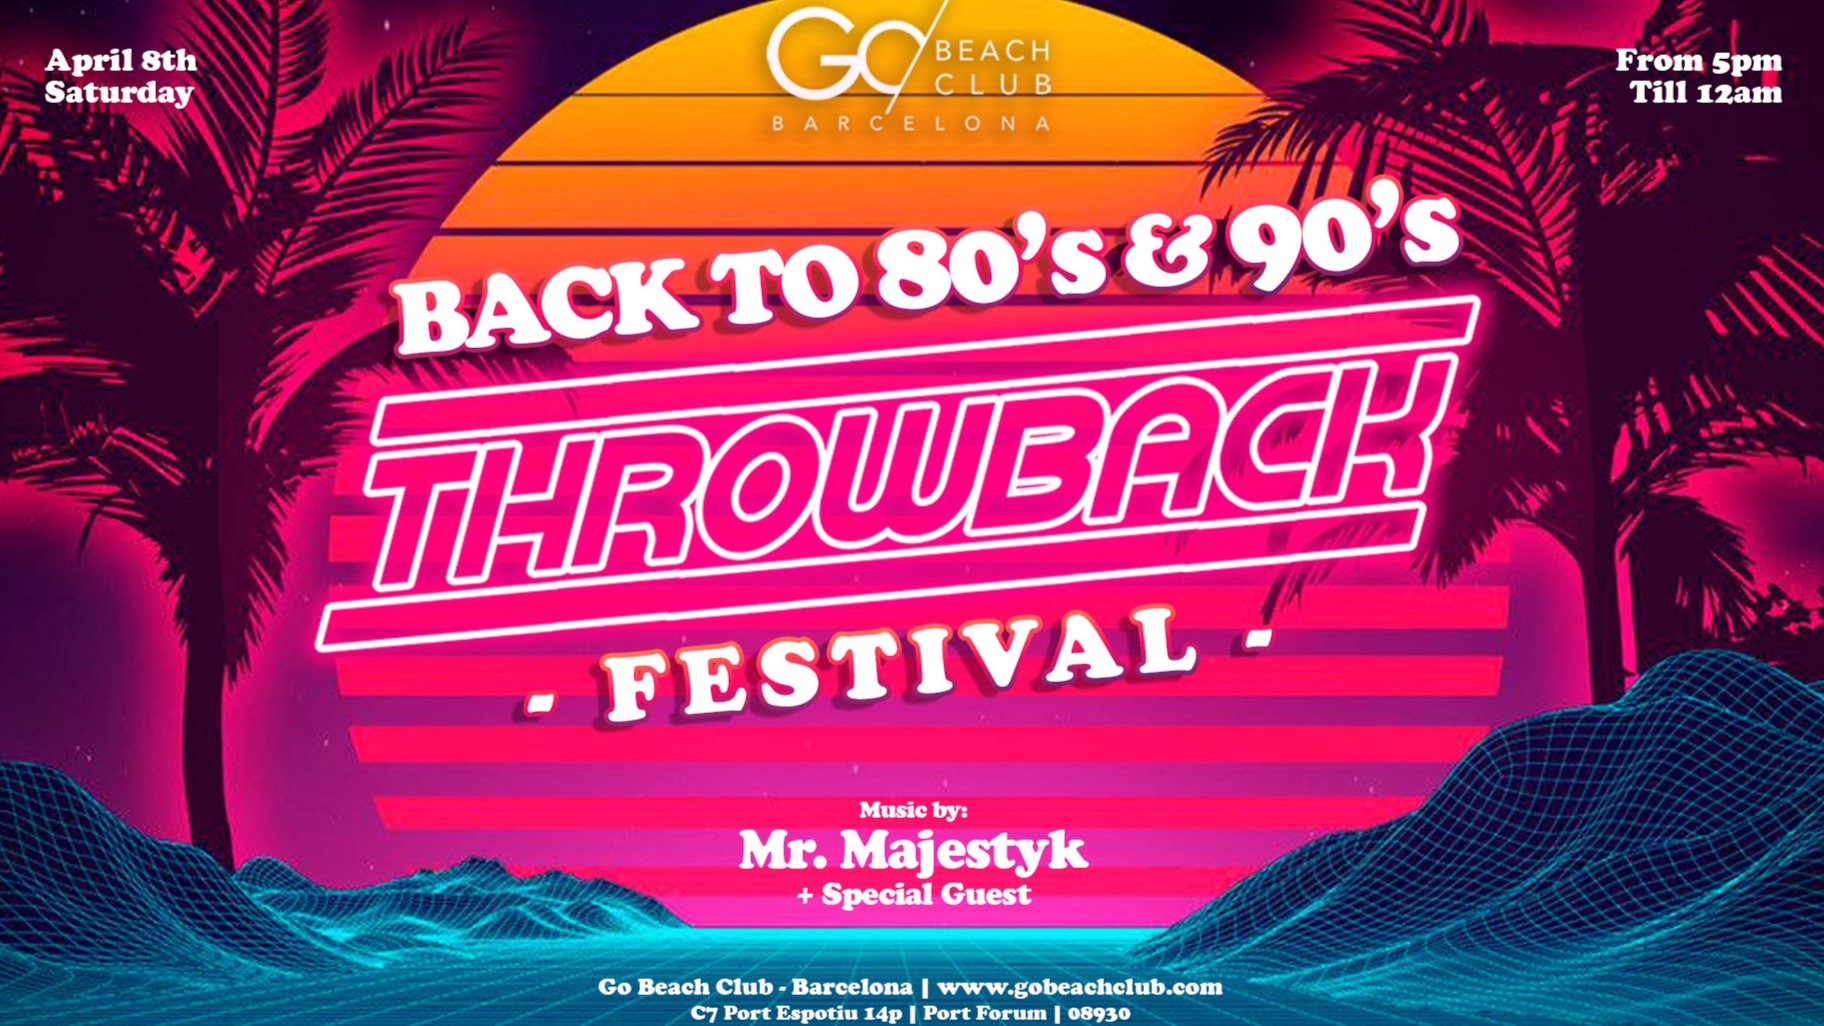 Go Beach Club gets decked out for Throwback's pool party